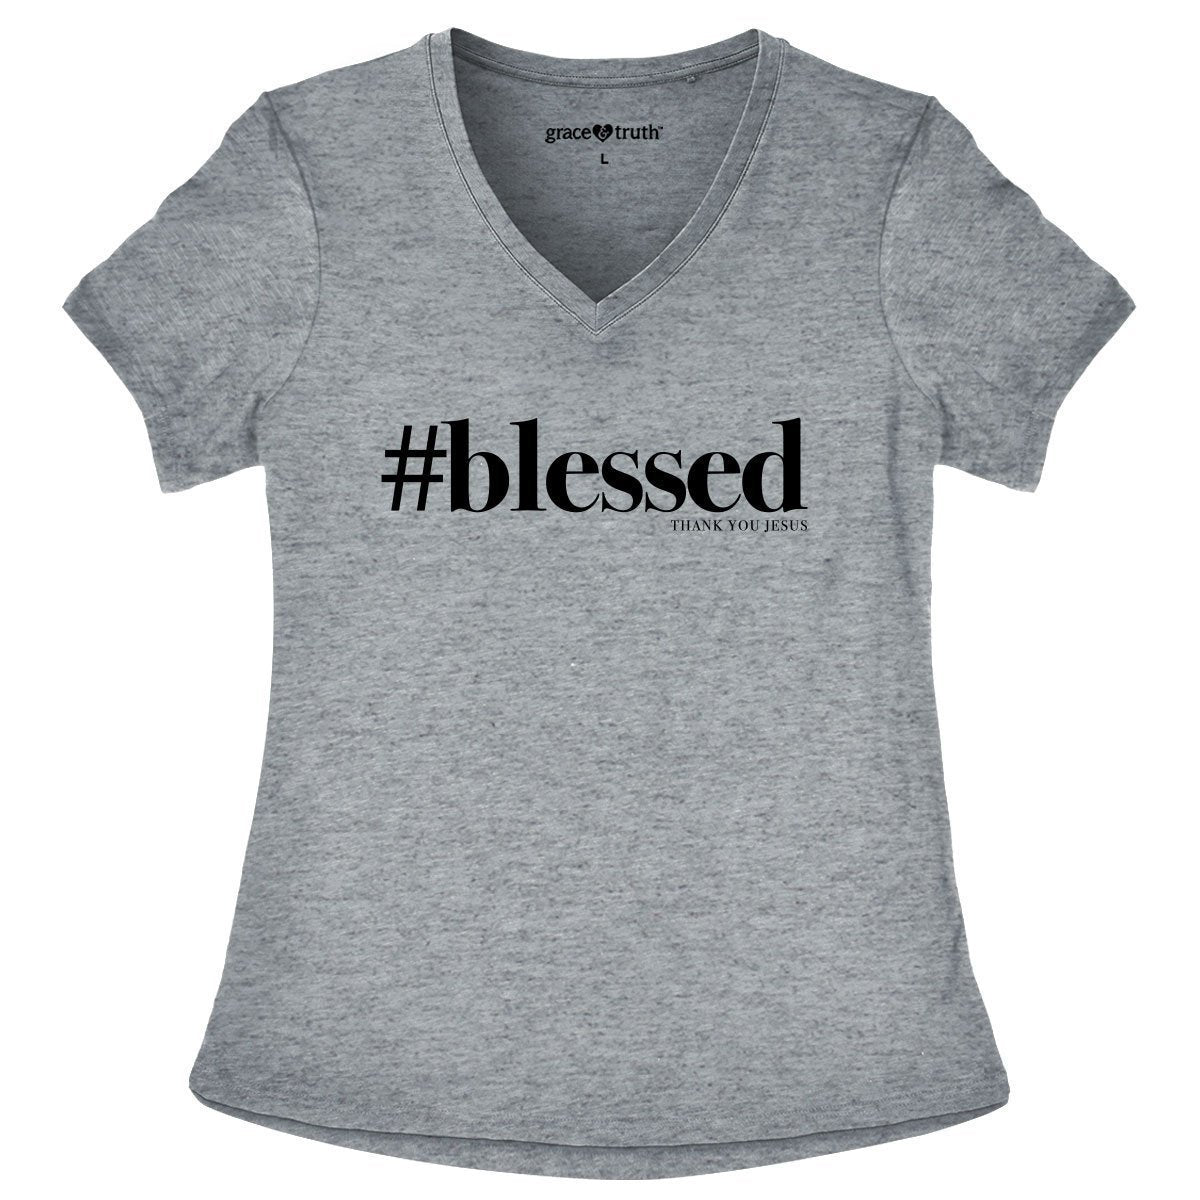 Cherished Girl Grace & Truth # Blessed Thank You Jesus V-Neck Christian Bright T Shirt